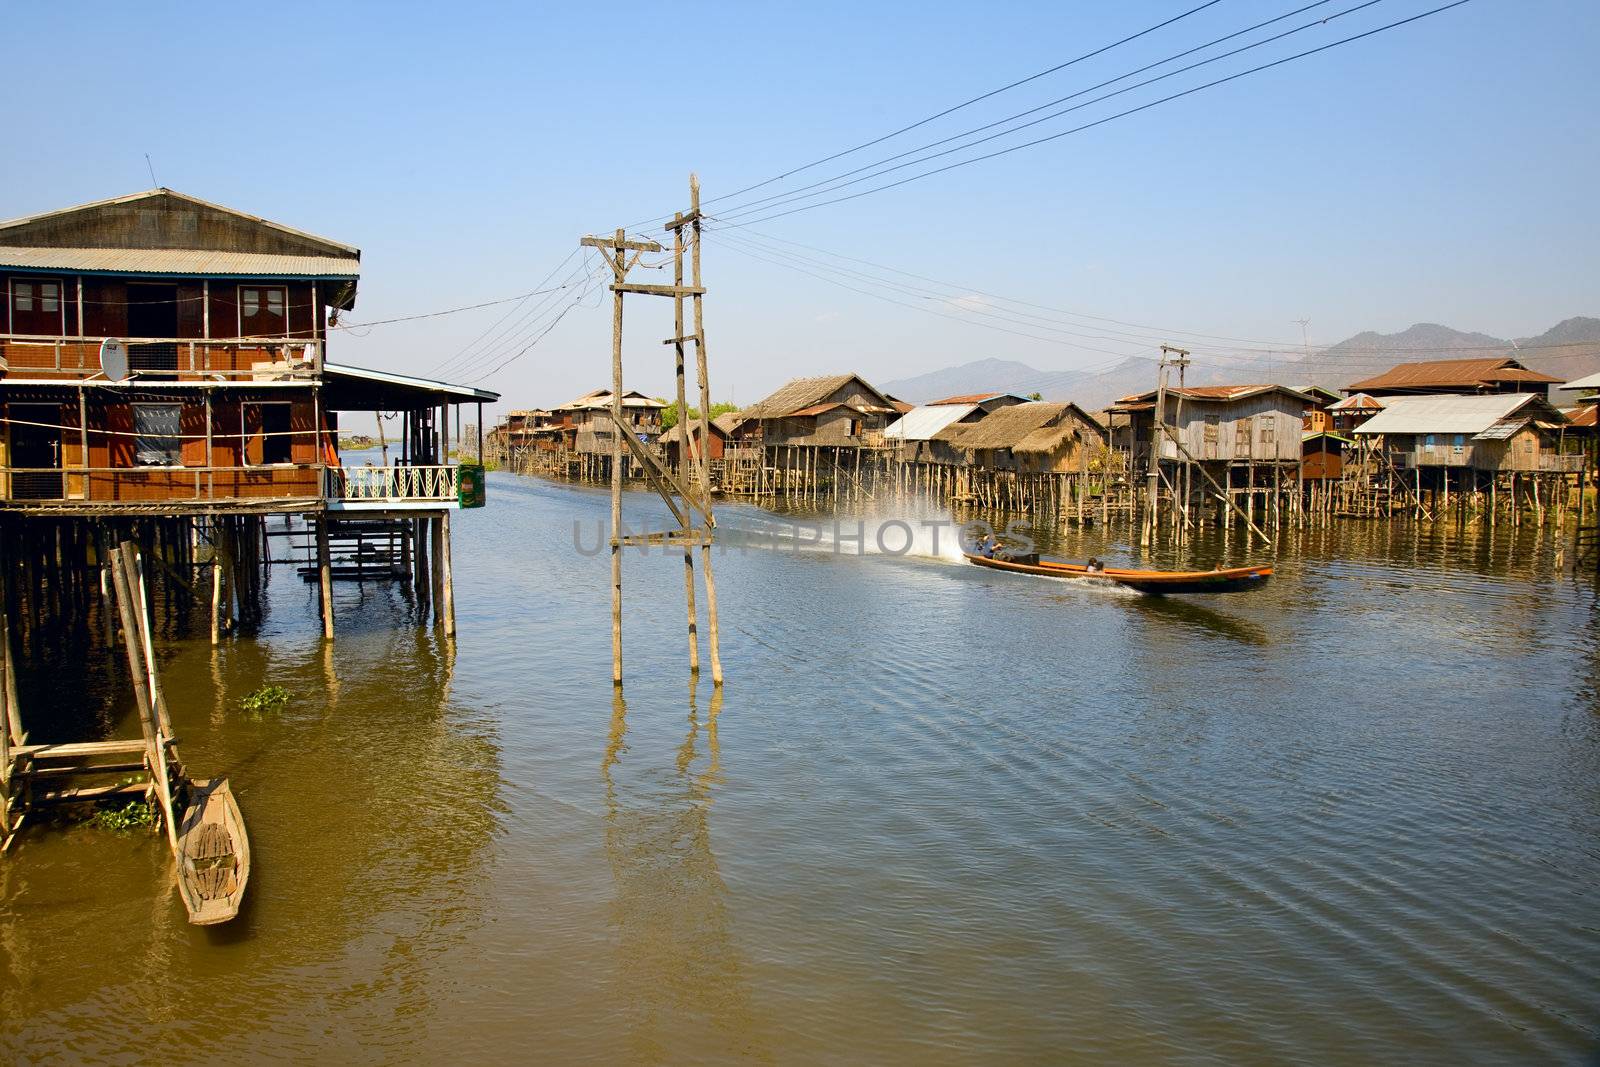 Village house on Inle lake standing on stilt and made from bamboo and palm leafs is accessible only via small boat.